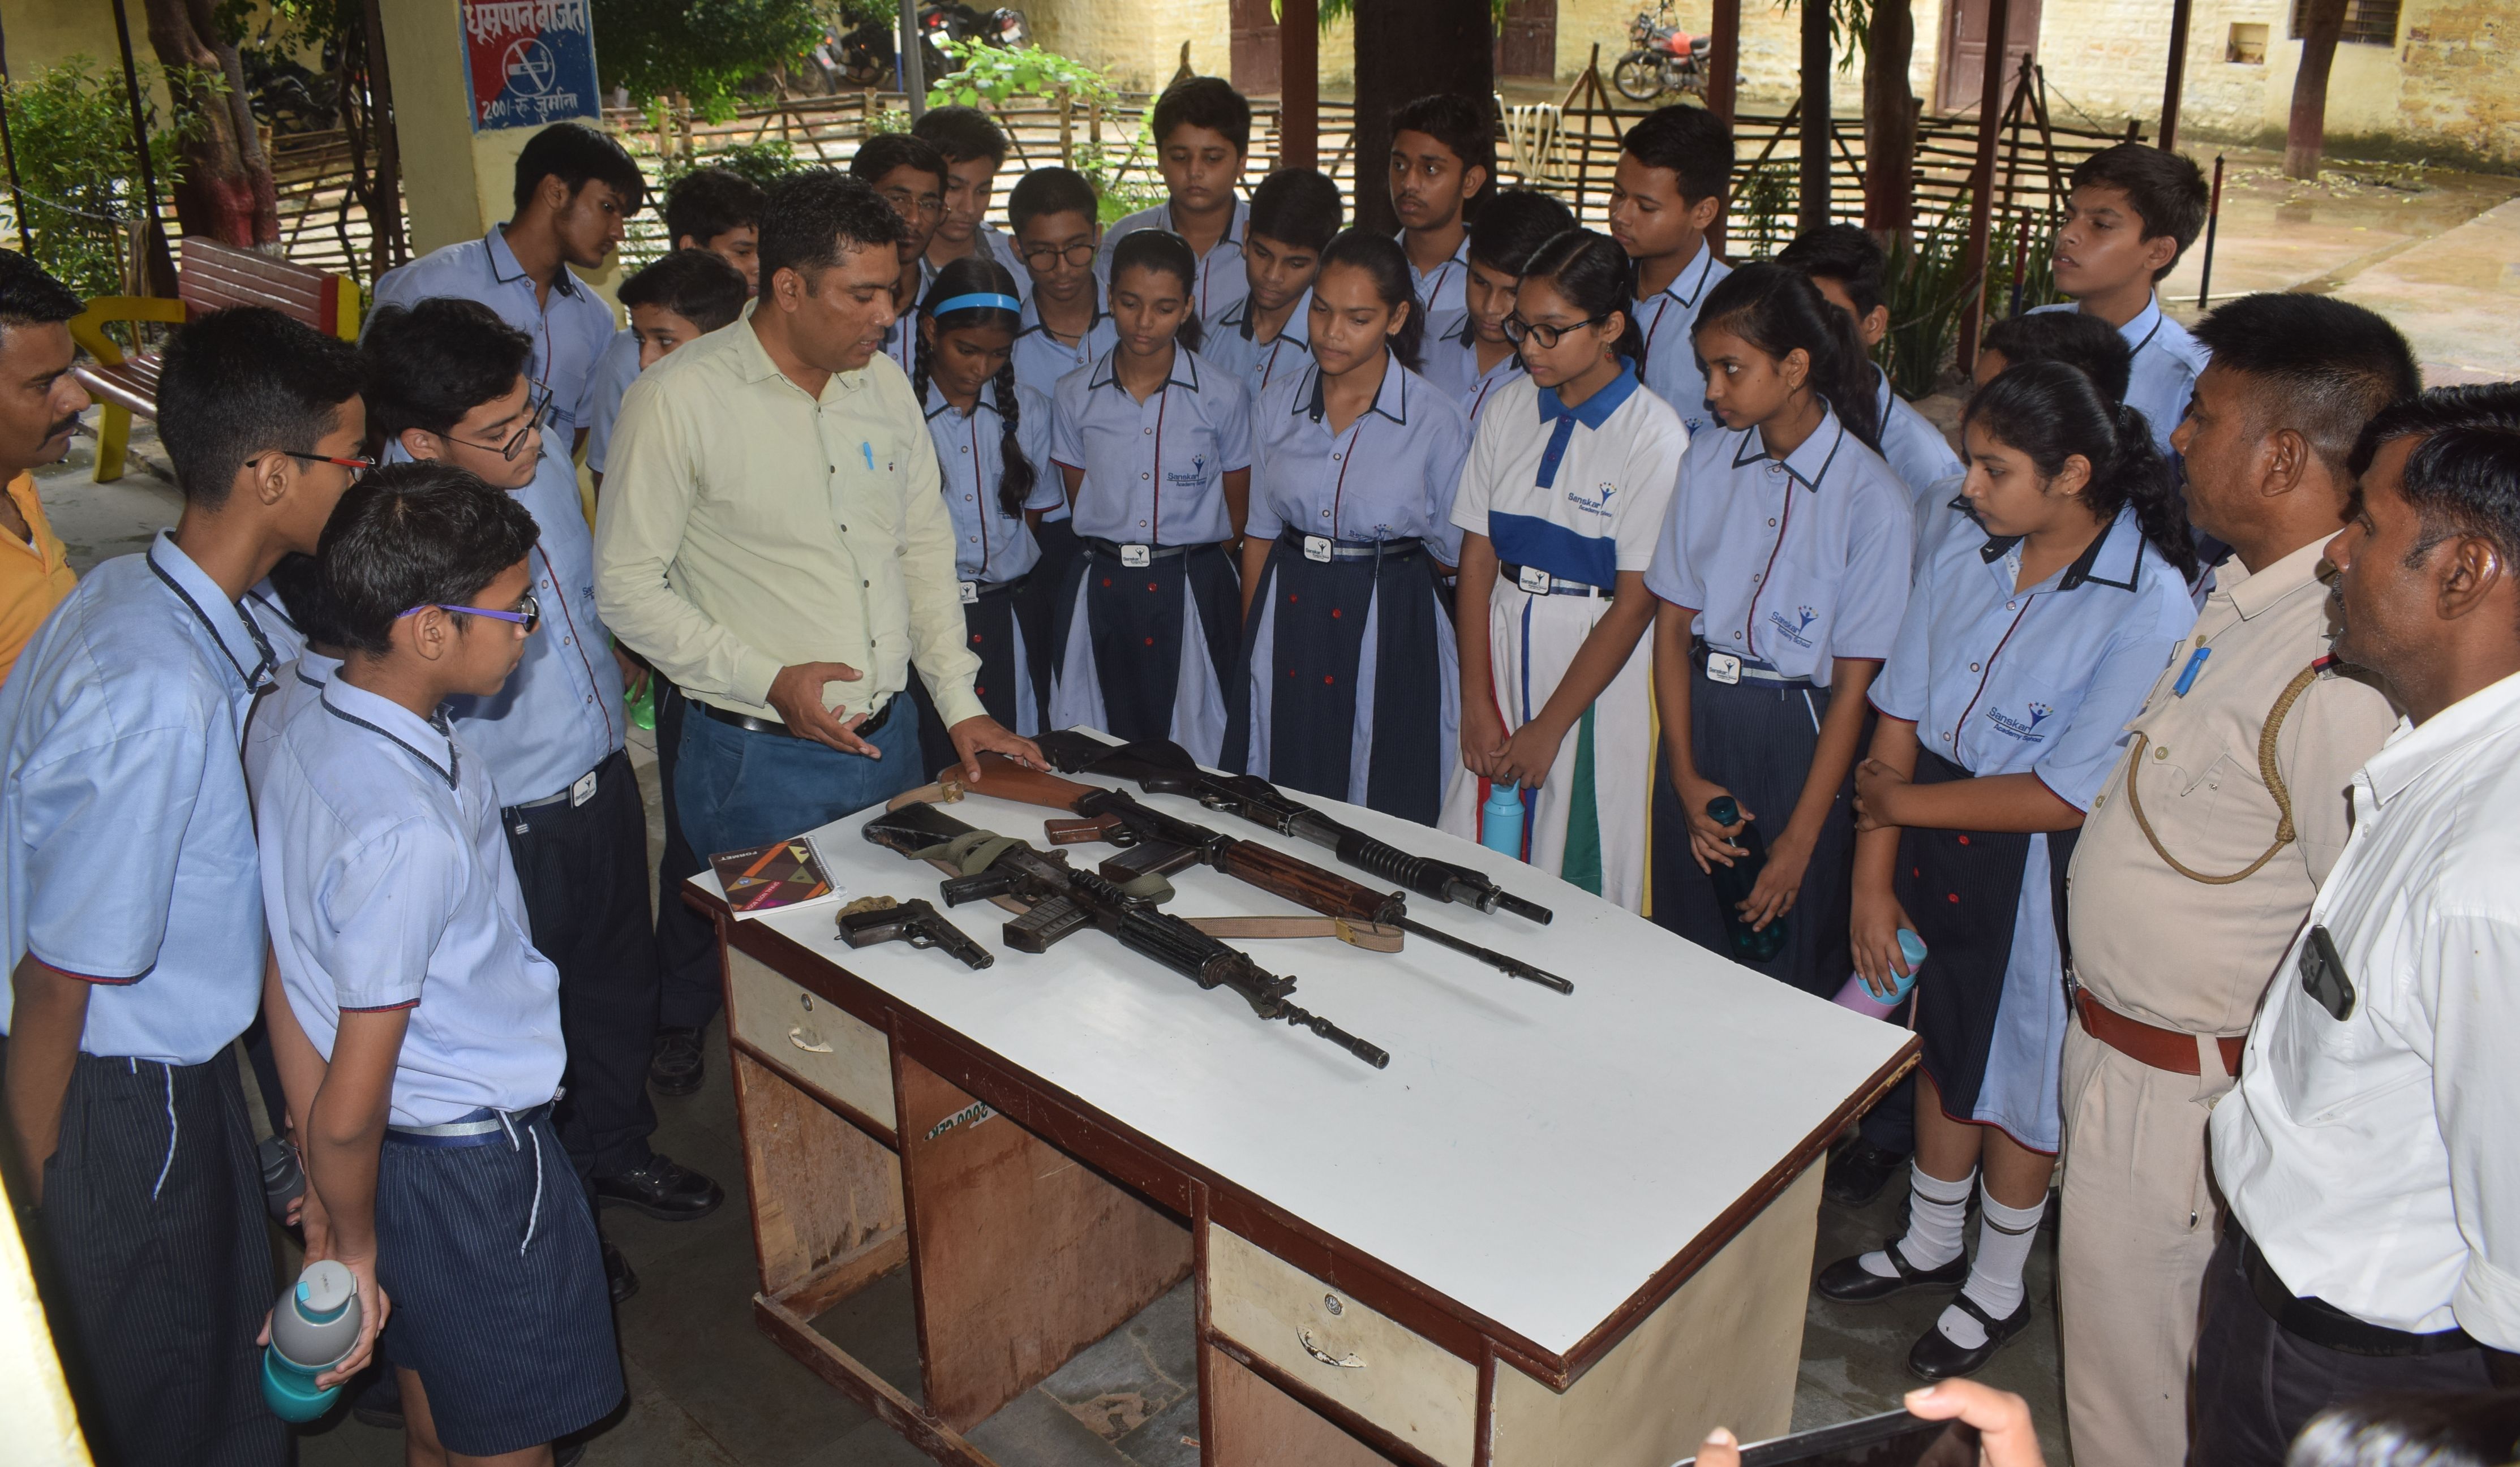 Children know policing, thrilled to see weapons